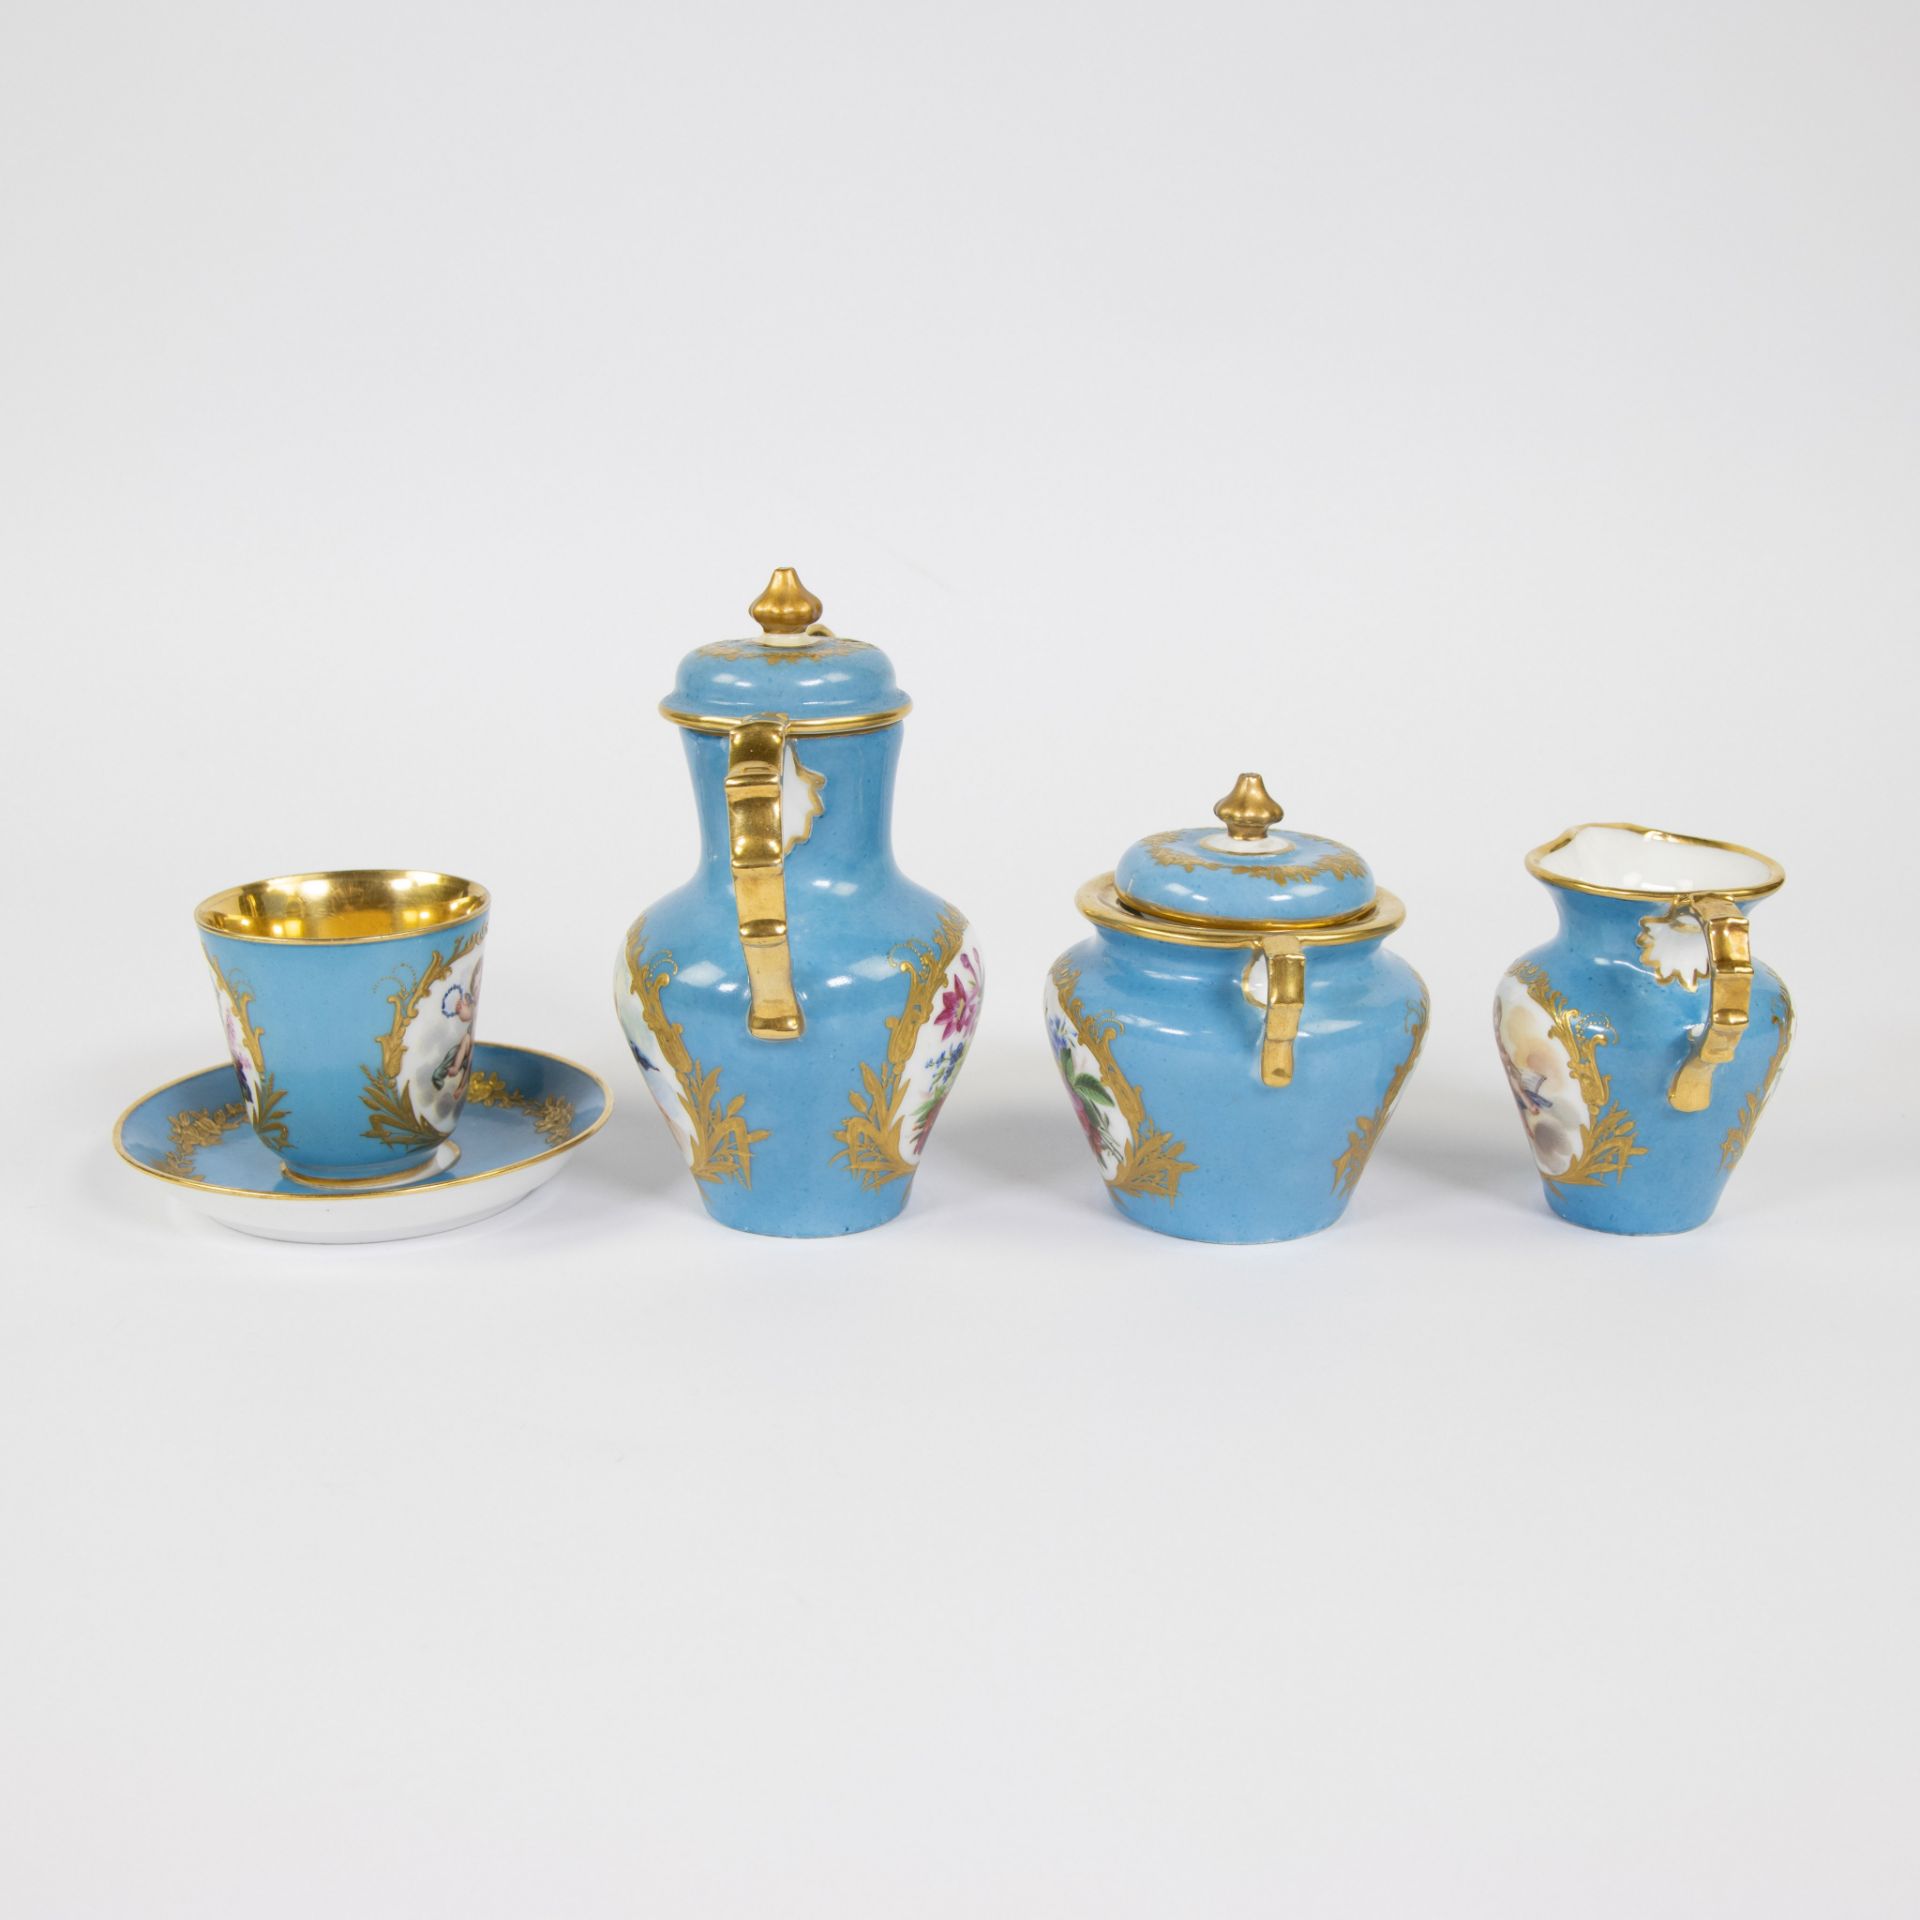 Mokka set solitaire or égoïste in porcelain decorated with cherubs and gold painting, Paris ca 1850 - Image 4 of 5